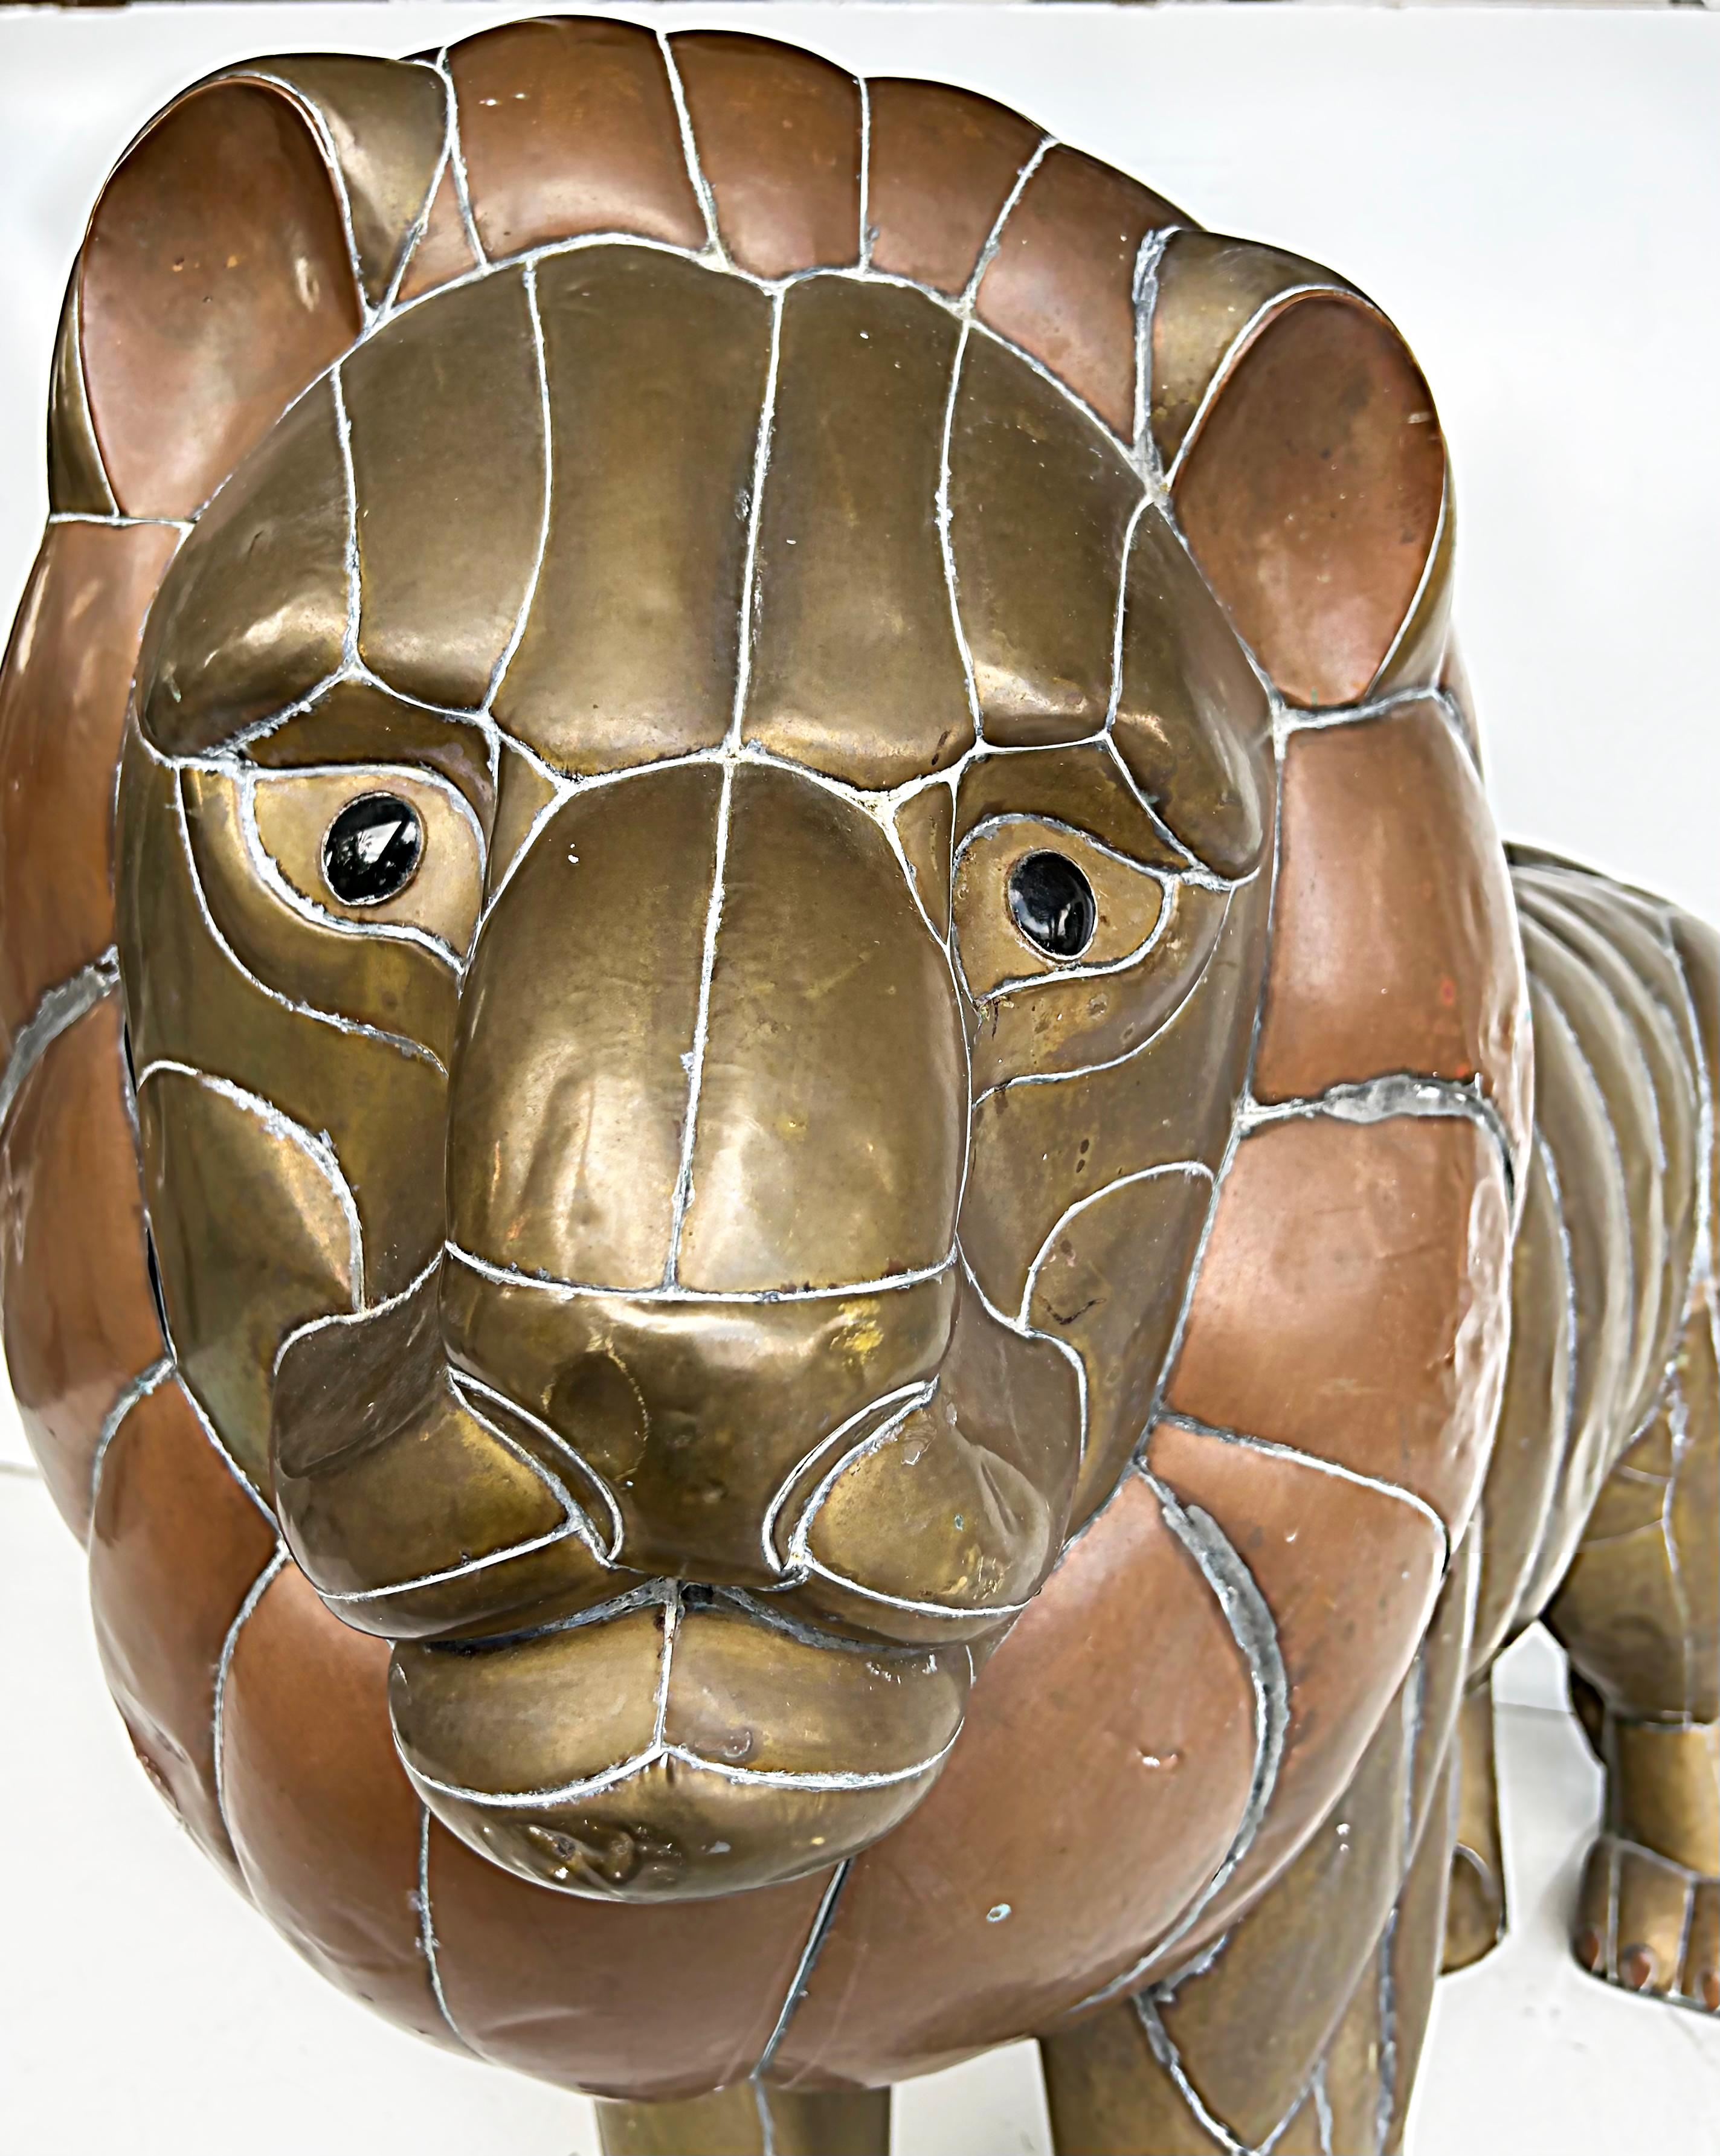 Sergio Bustamante Mexican Modern mixed  metal Lion sculpture.

Offered for sale is a large and important early Mexican modernism mixed metals sculpture by Sergio Bustamante c1960s. This large and impressive sculpture has signs of wear with patina to